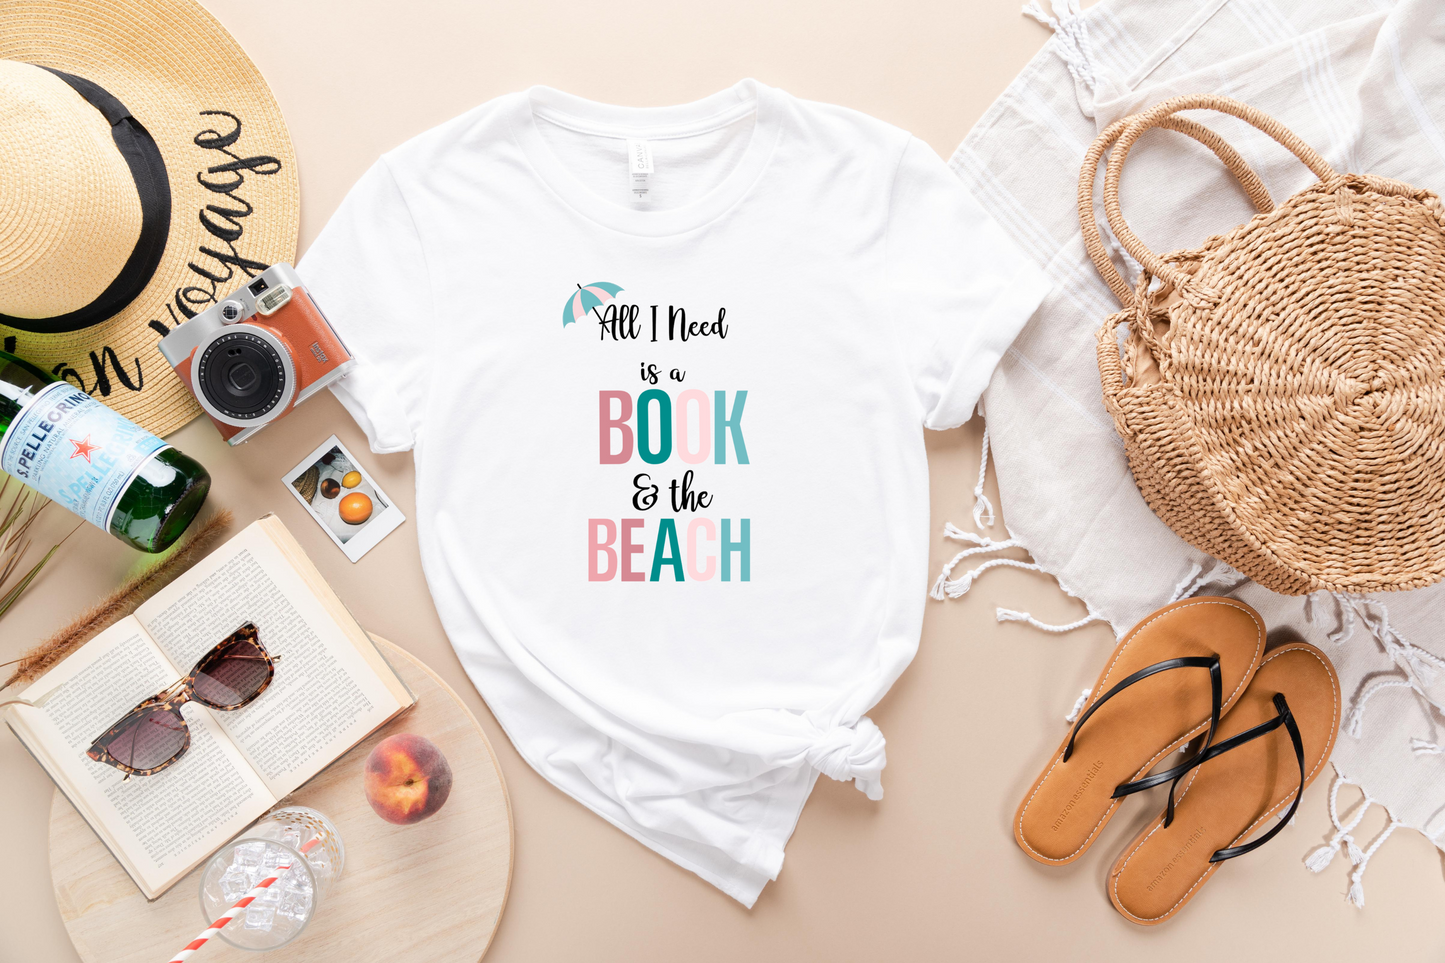 All I Need is a Book & the Beach T-Shirt